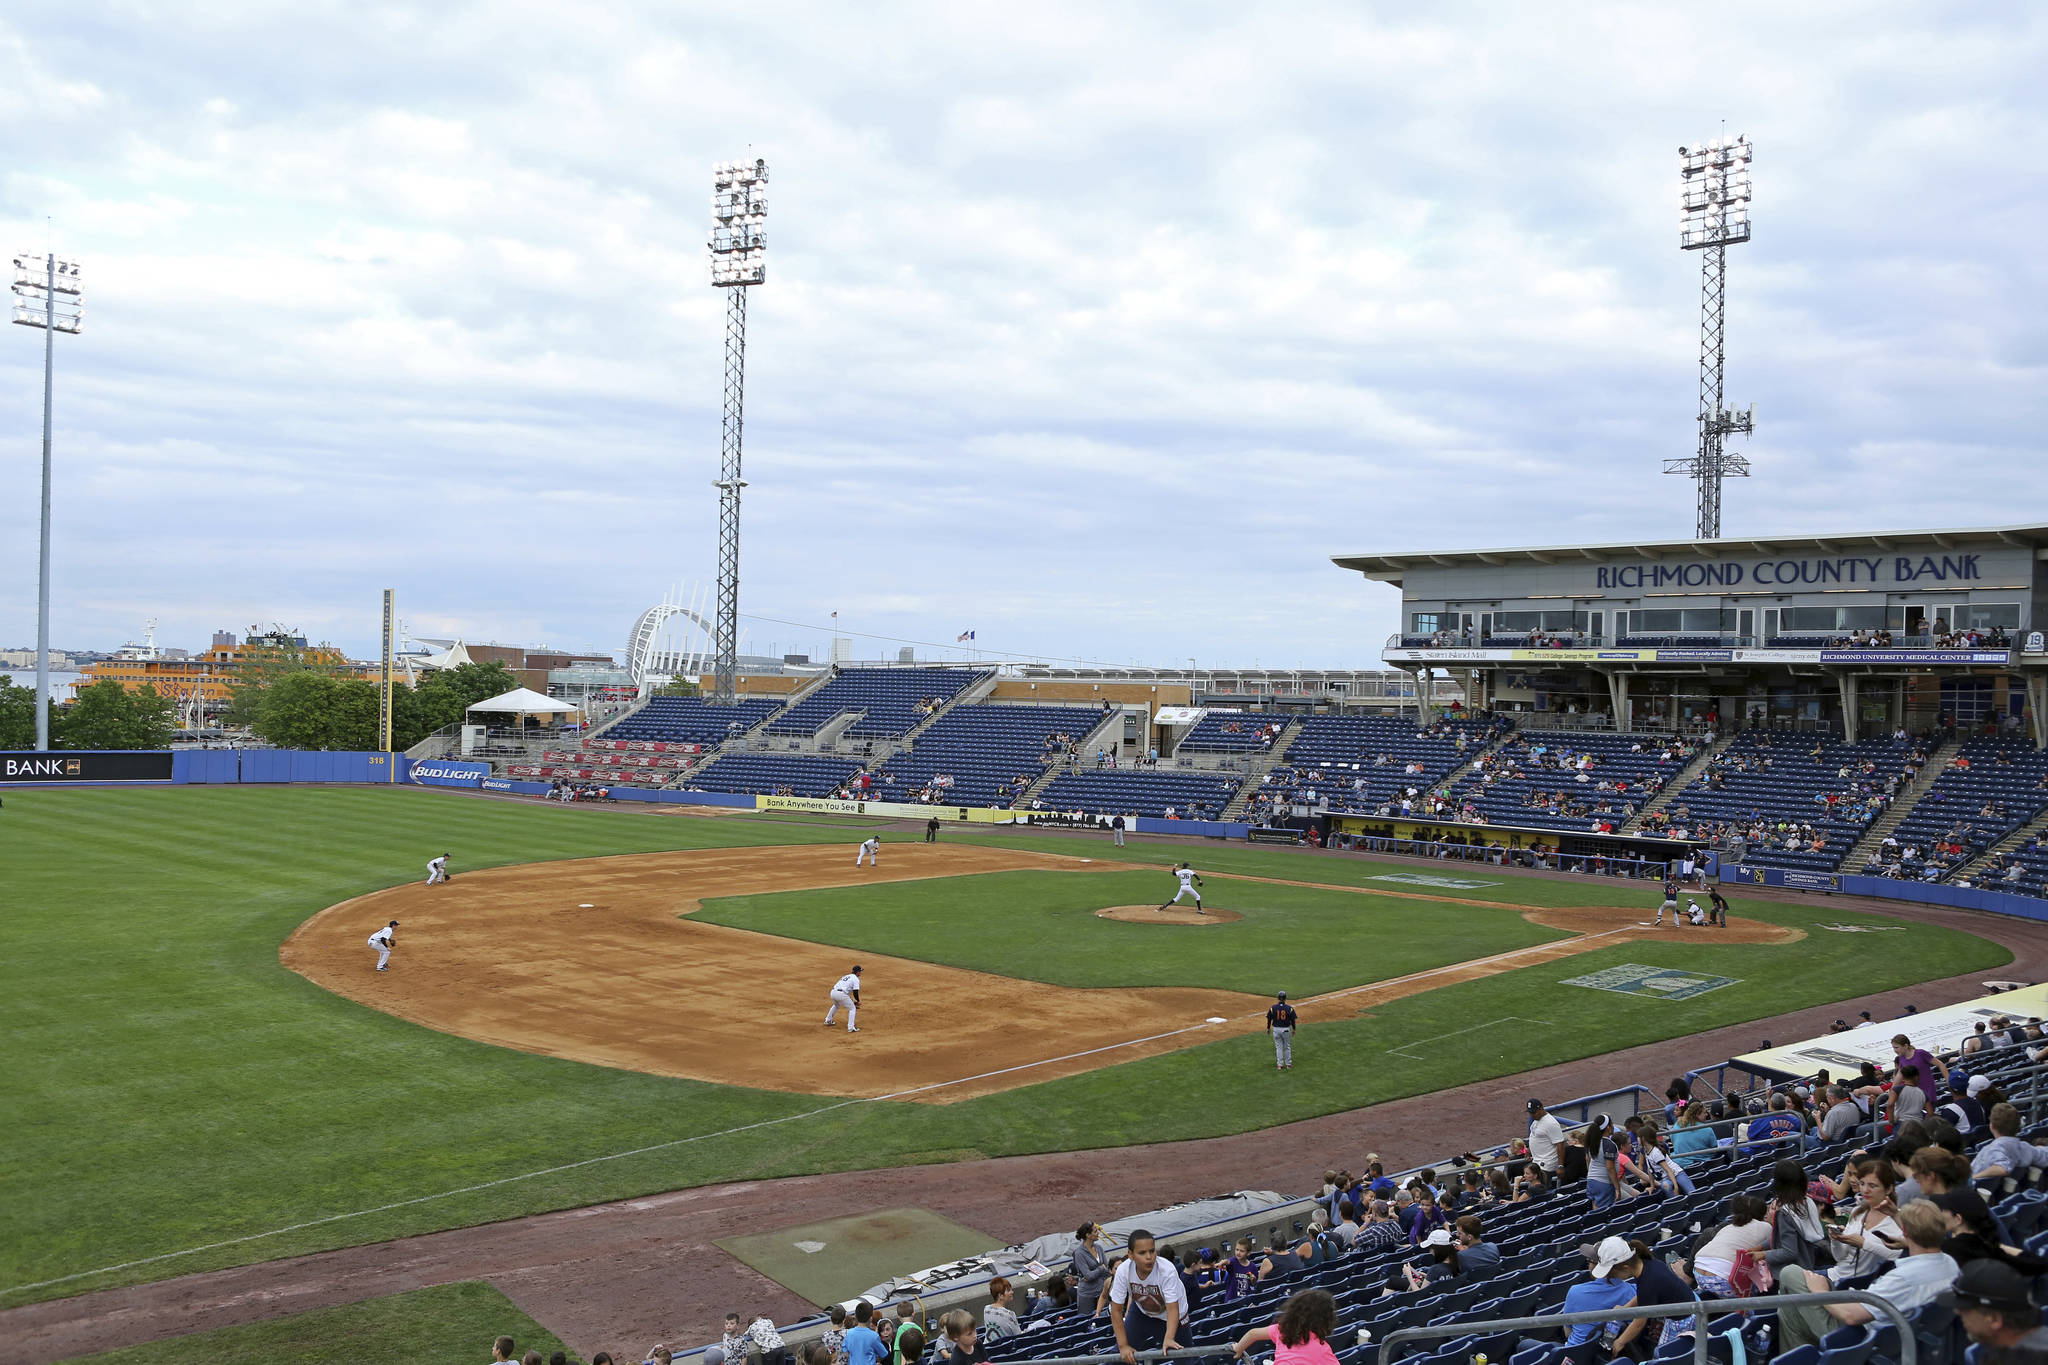 This June 2015 photo shows an overall view of the Staten Island Yankees in action against the State College Spikes at Richmond County Bank Ballpark during a minor league baseball game in Staten Island, N.Y. The owners of the Staten Island Yankees announced in a statement Thursday, Dec. 3, 2020, that with “great regret, we must cease operations.” They also said they were suing the New York Yankees and Major League Baseball “to hold those entities accountable for false promises” that they would always keep the team as a farm club. (AP Photo / Gregory Payan)